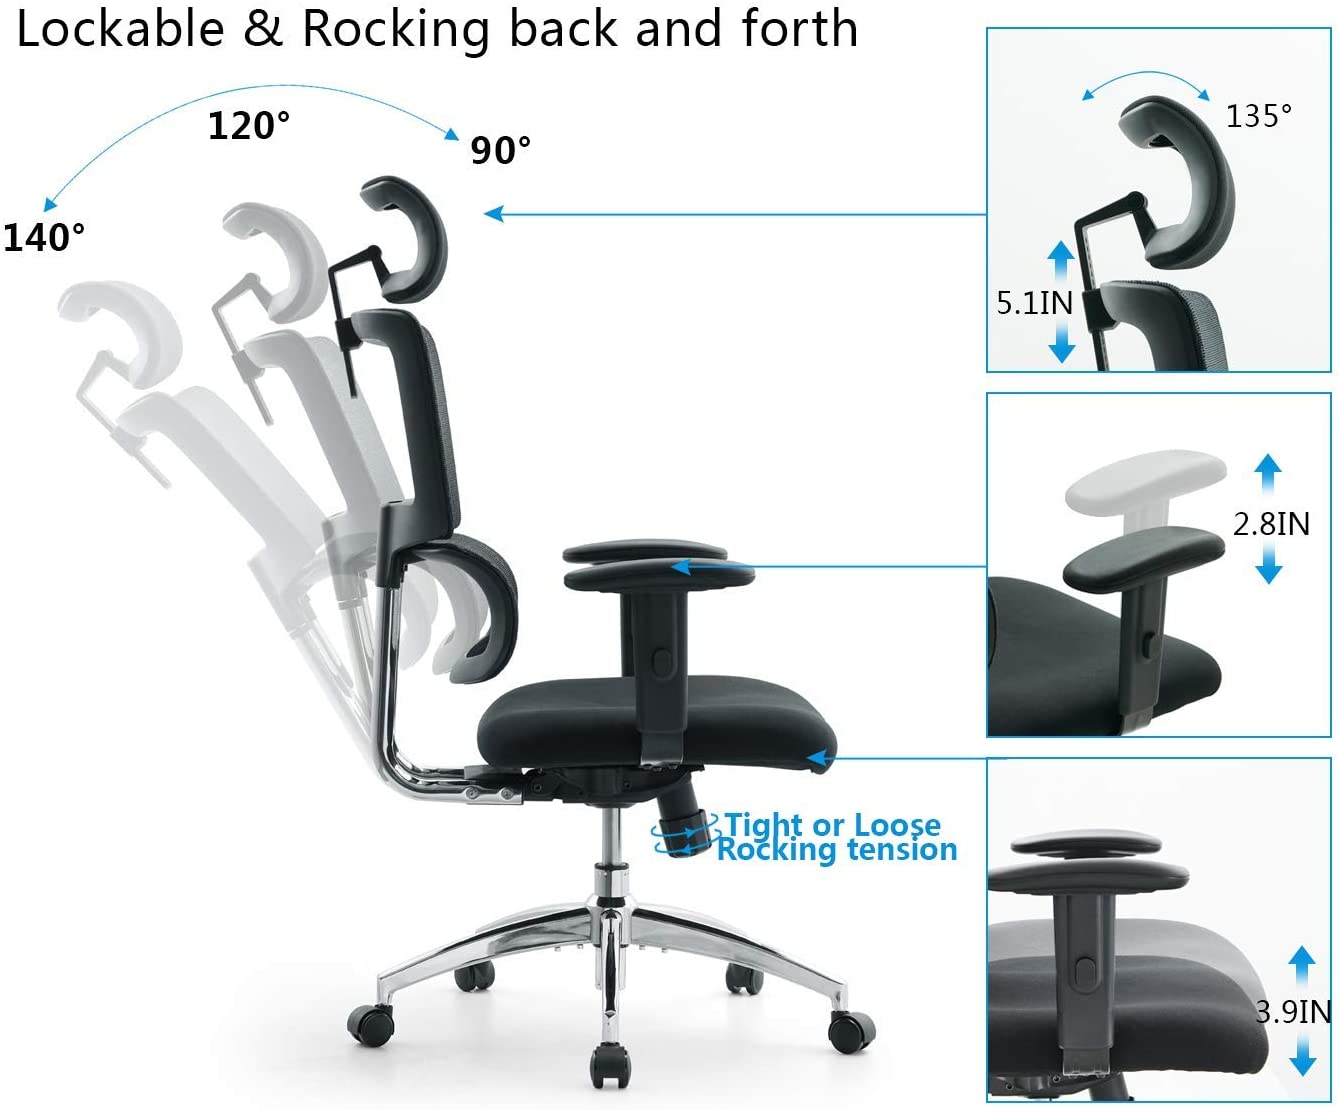 Ticova Ergonomic Office Chair - High Back Desk Chair with Elastic Lumbar Support & Thick Seat Cushion - 140°Reclining & Rocking Mesh Computer Chair with Adjustable Headrest, Armrest - image 2 of 5